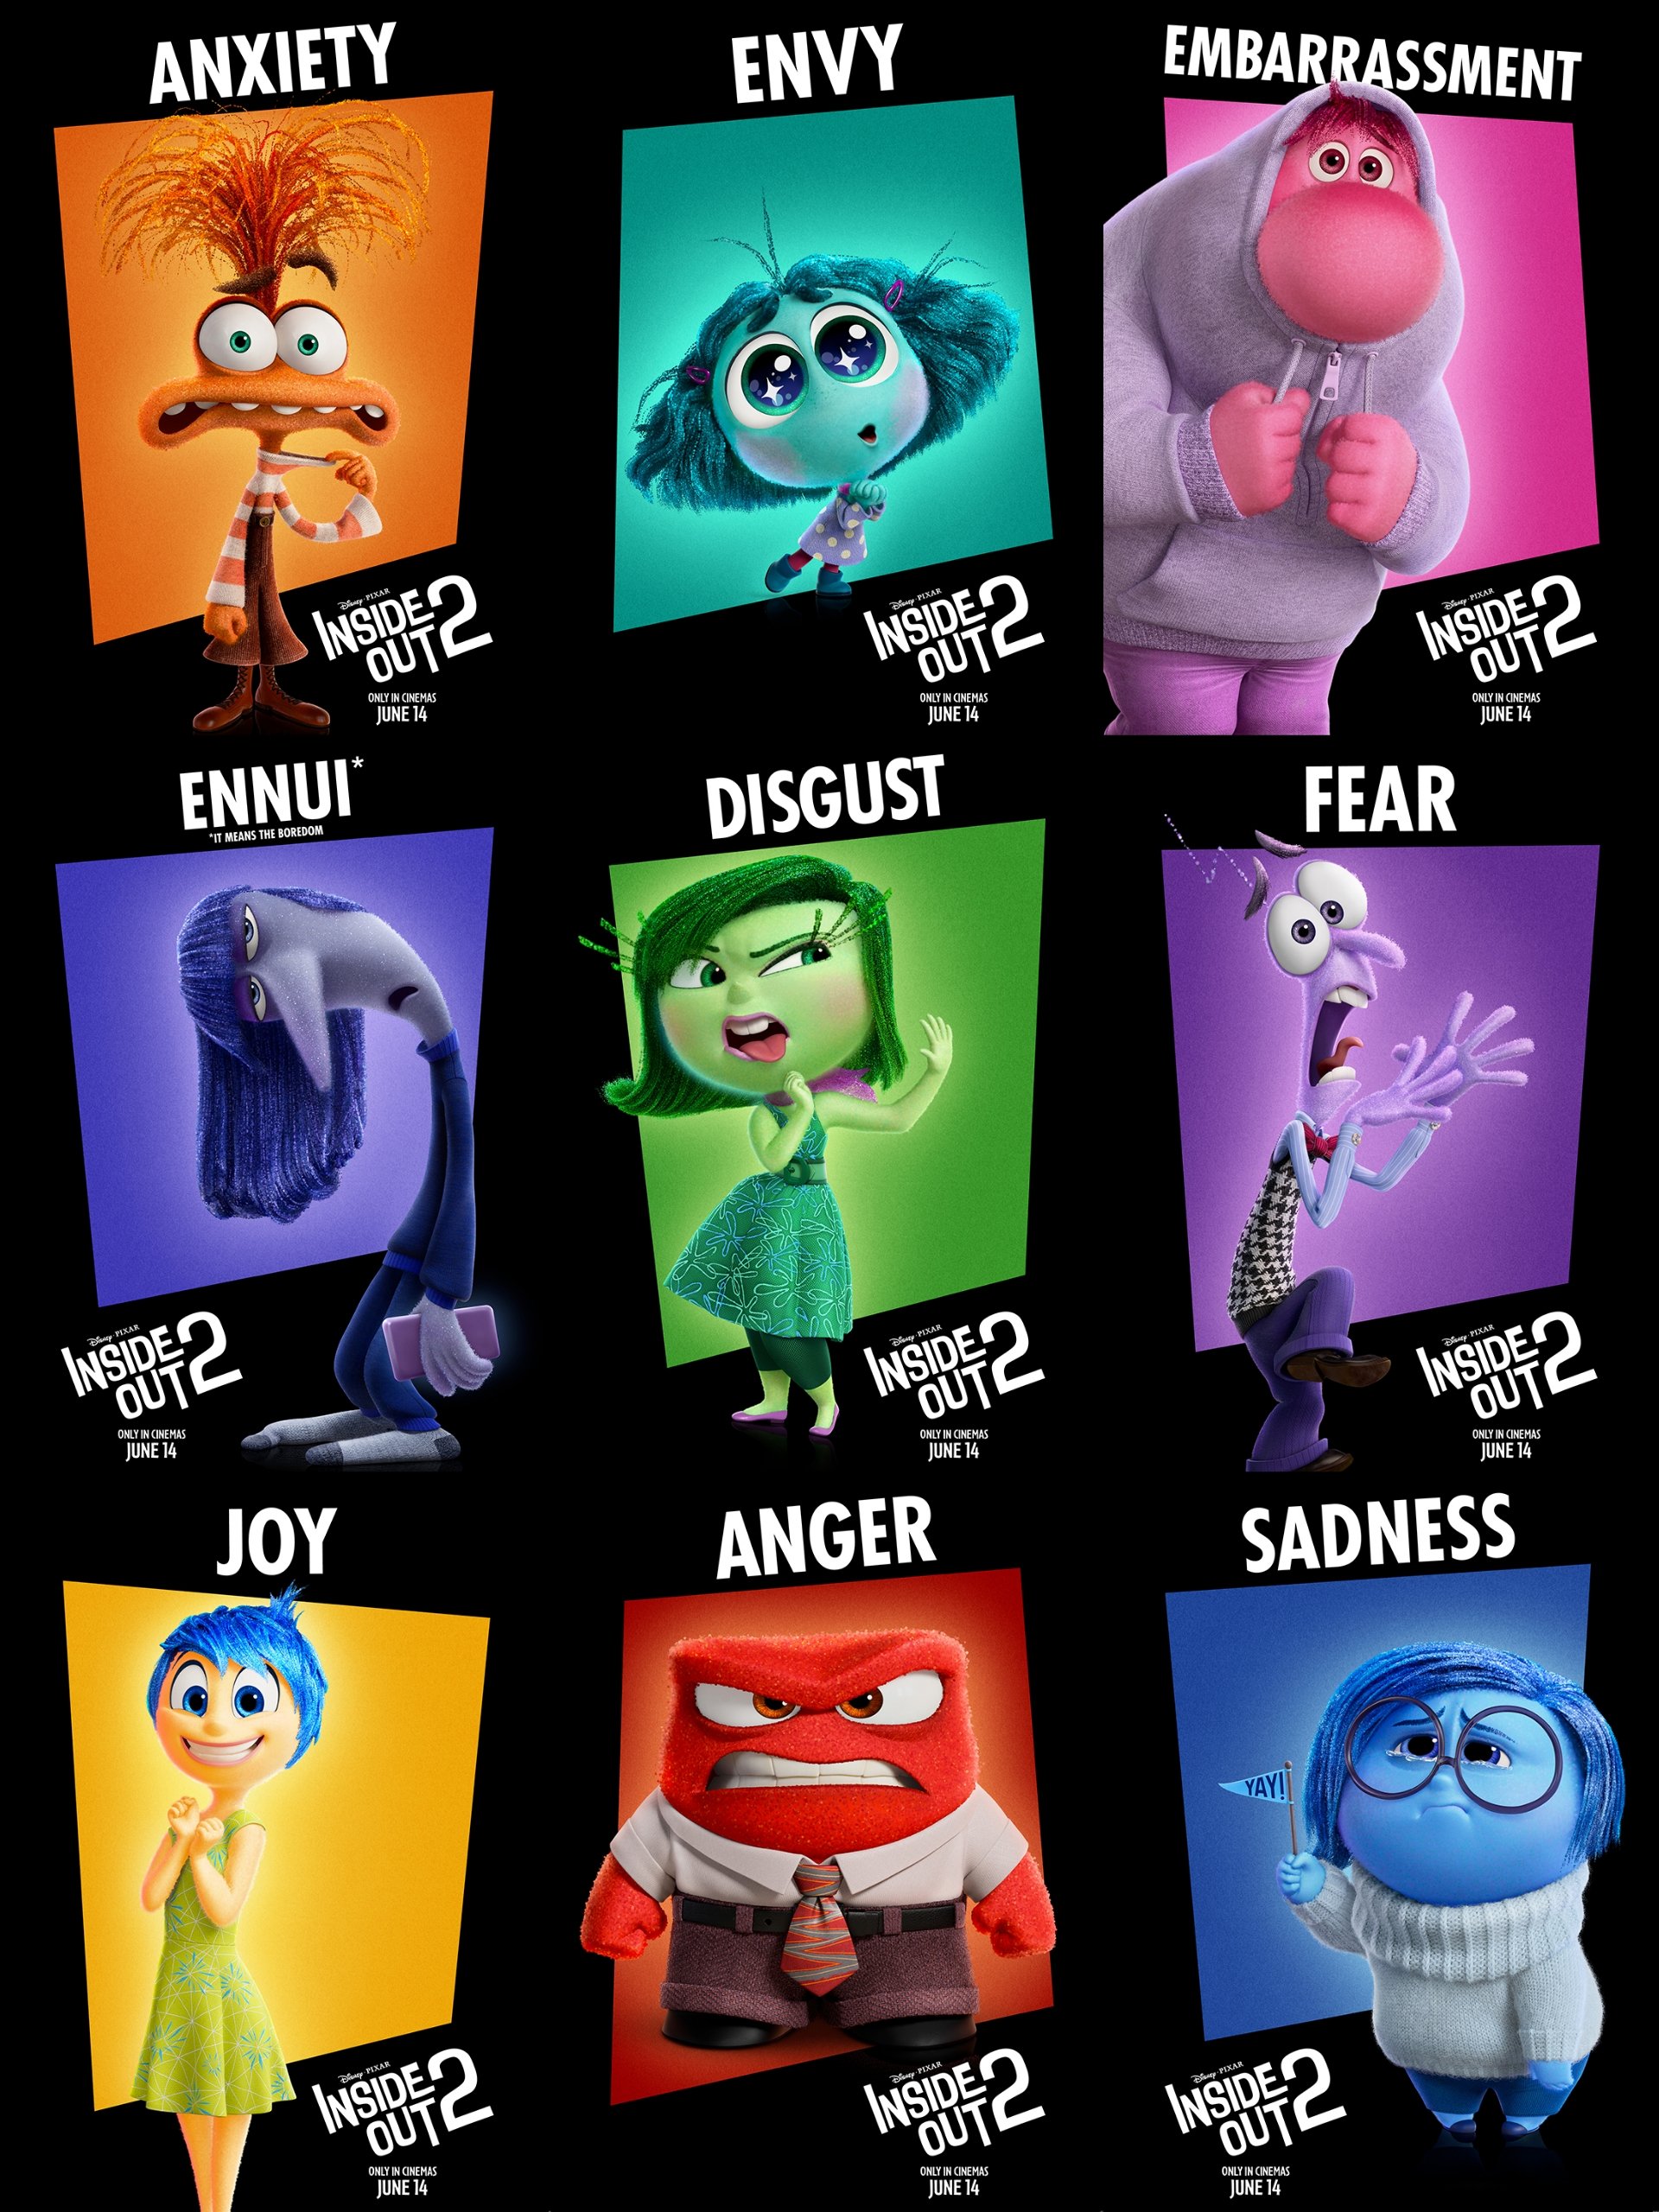 1710426190_youloveit_com_inside_out_2_poster